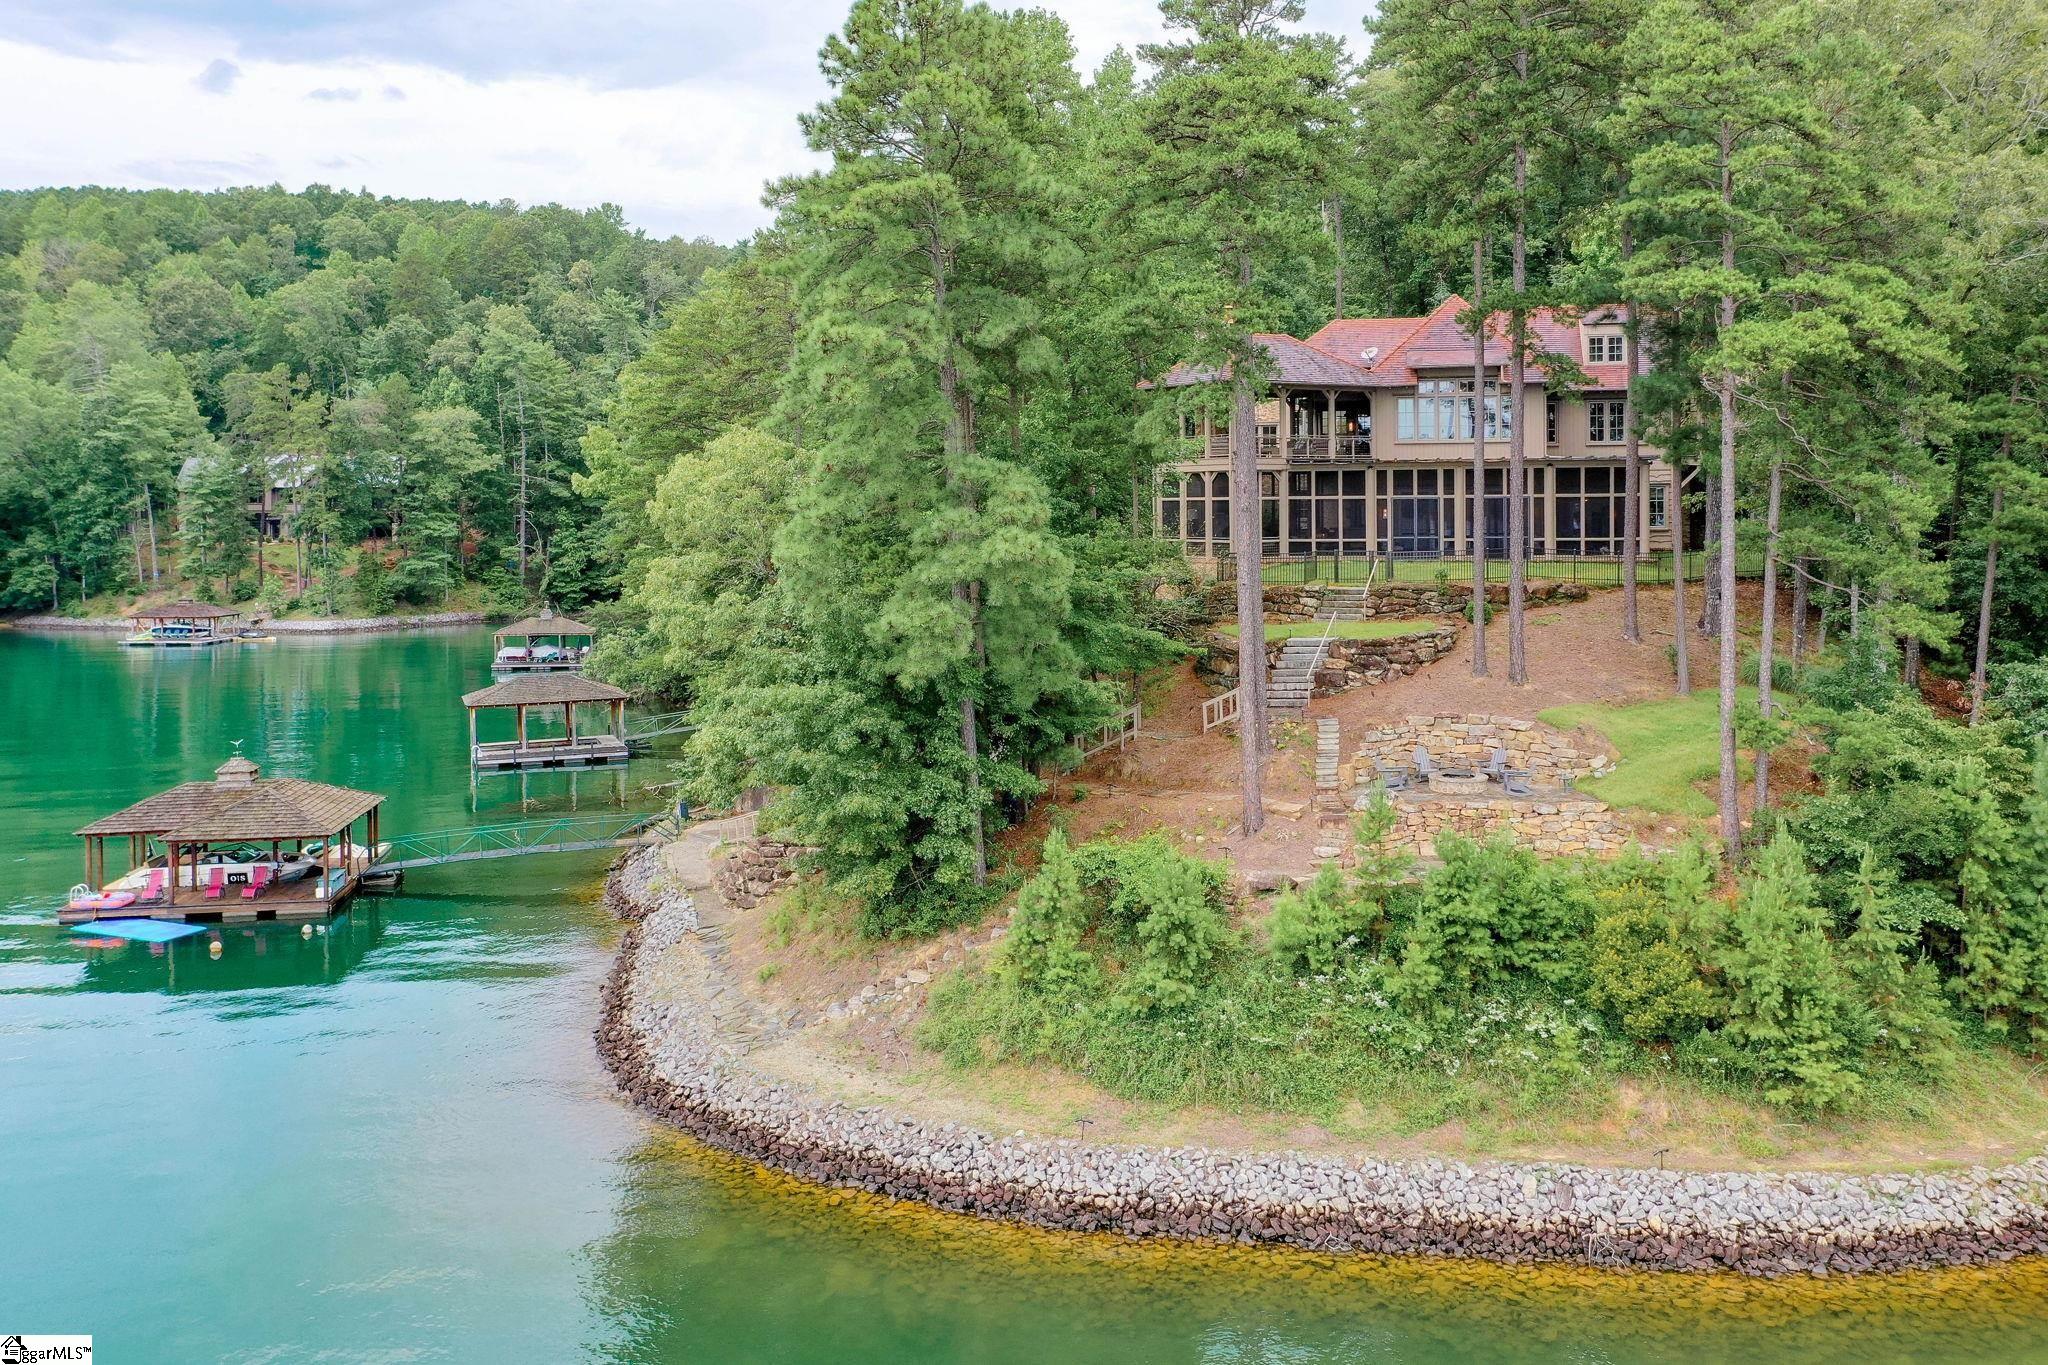 Step into a world of architectural brilliance at the Reserve at Lake Keowee. 136 S. Falls Rd. is a "ONE OF A KIND" FULLY FURNISHED, 5BR/5.5BA waterfront home that melds rustic charm with modern architecture! Welcome to your dream lakefront oasis, located on one of the "Hands Down, BEST" lots on Lake Keowee. This stunning, "private" property offers the perfect blend of luxury and natural beauty, with breathtaking views of the sparkling blue water, mountains & lush greenery. To truly experience the uniqueness of this home, you must see it for yourself. Vaulted ceilings with post and beam accents, large combination living room/dining room/kitchen area with access to the covered porches, floor-to-ceiling glass windows and custom pocket doors seamlessly blend indoor and outdoor spaces giving you amazing 180-degree lake views. Three floors of living space, including an Elevator, multiple indoor and outdoor recreation areas, wrap around enclosed screened in and covered porches with fireplaces. The covered porches and terraces account for more than 3000 sf. The third level includes an additional Bonus/Mancave/Playroom area with 5th bedroom and full bath. Rare materials were used to create this masterpiece, that was voted the 2008 Designer Show House by Atlanta Homes Magazine, including North Carolina stone, reclaimed barn wood floors, and extensive oak timbering. The gourmet kitchen is a chef's dream, boasting top-of-the-line stainless steel WOLF and Sub-Zero appliances, Meile Cappuccino machine, stone countertops, secondary wet bar and ample cabinetry for all your culinary needs. The Owner's suite is a true retreat, with expansive windows offering stunning views of the lake and a luxurious on-suite bathroom featuring a soaking tub and walk-in shower. Additional bedrooms offer ample space for guests, while a spacious covered balcony, with couch swings and fireplace, provide the perfect spot for entertaining and enjoying the stunning views. Of course, the Savant smart home system gives you total control of the entire home at all times. Outside, you'll find your own private paradise, with a large dock providing easy access to the 18,000-acre lake for swimming, boating, and fishing. The lower flagstone patio with a custom firepit is the ideal morning spot to watch the sunrise or roast marshmallows in the evening! This truly is the ultimate lakefront retreat, offering the perfect escape from the hustle and bustle of everyday life. Add the amenities and membership of the Reserve including the Jack Nicklaus Signature Golf Course, par 3 practice facility with driving range, Clubhouse with fine dining, pub area, wine bar, Fitness Center, Hiking Trails, Har-Tru Clay Tennis Courts, Lakeside Resort-Style Pool and Cabana, Pickleball Courts, Marina offering both slips and boat rentals, and the Market great for lunch or shopping for essentials. This gated community offers many activities including fitness classes, various social clubs, and a high-speed fiber-optic internet system in place. The Reserve at Lake Keowee is a full amenity lakefront golf community. Don't miss out on the opportunity to make this breathtaking property your own. Contact us today to schedule a private tour and experience the beauty and luxury of lakefront living at 136 S Falls Rd at the Reserve at Lake Keowee.